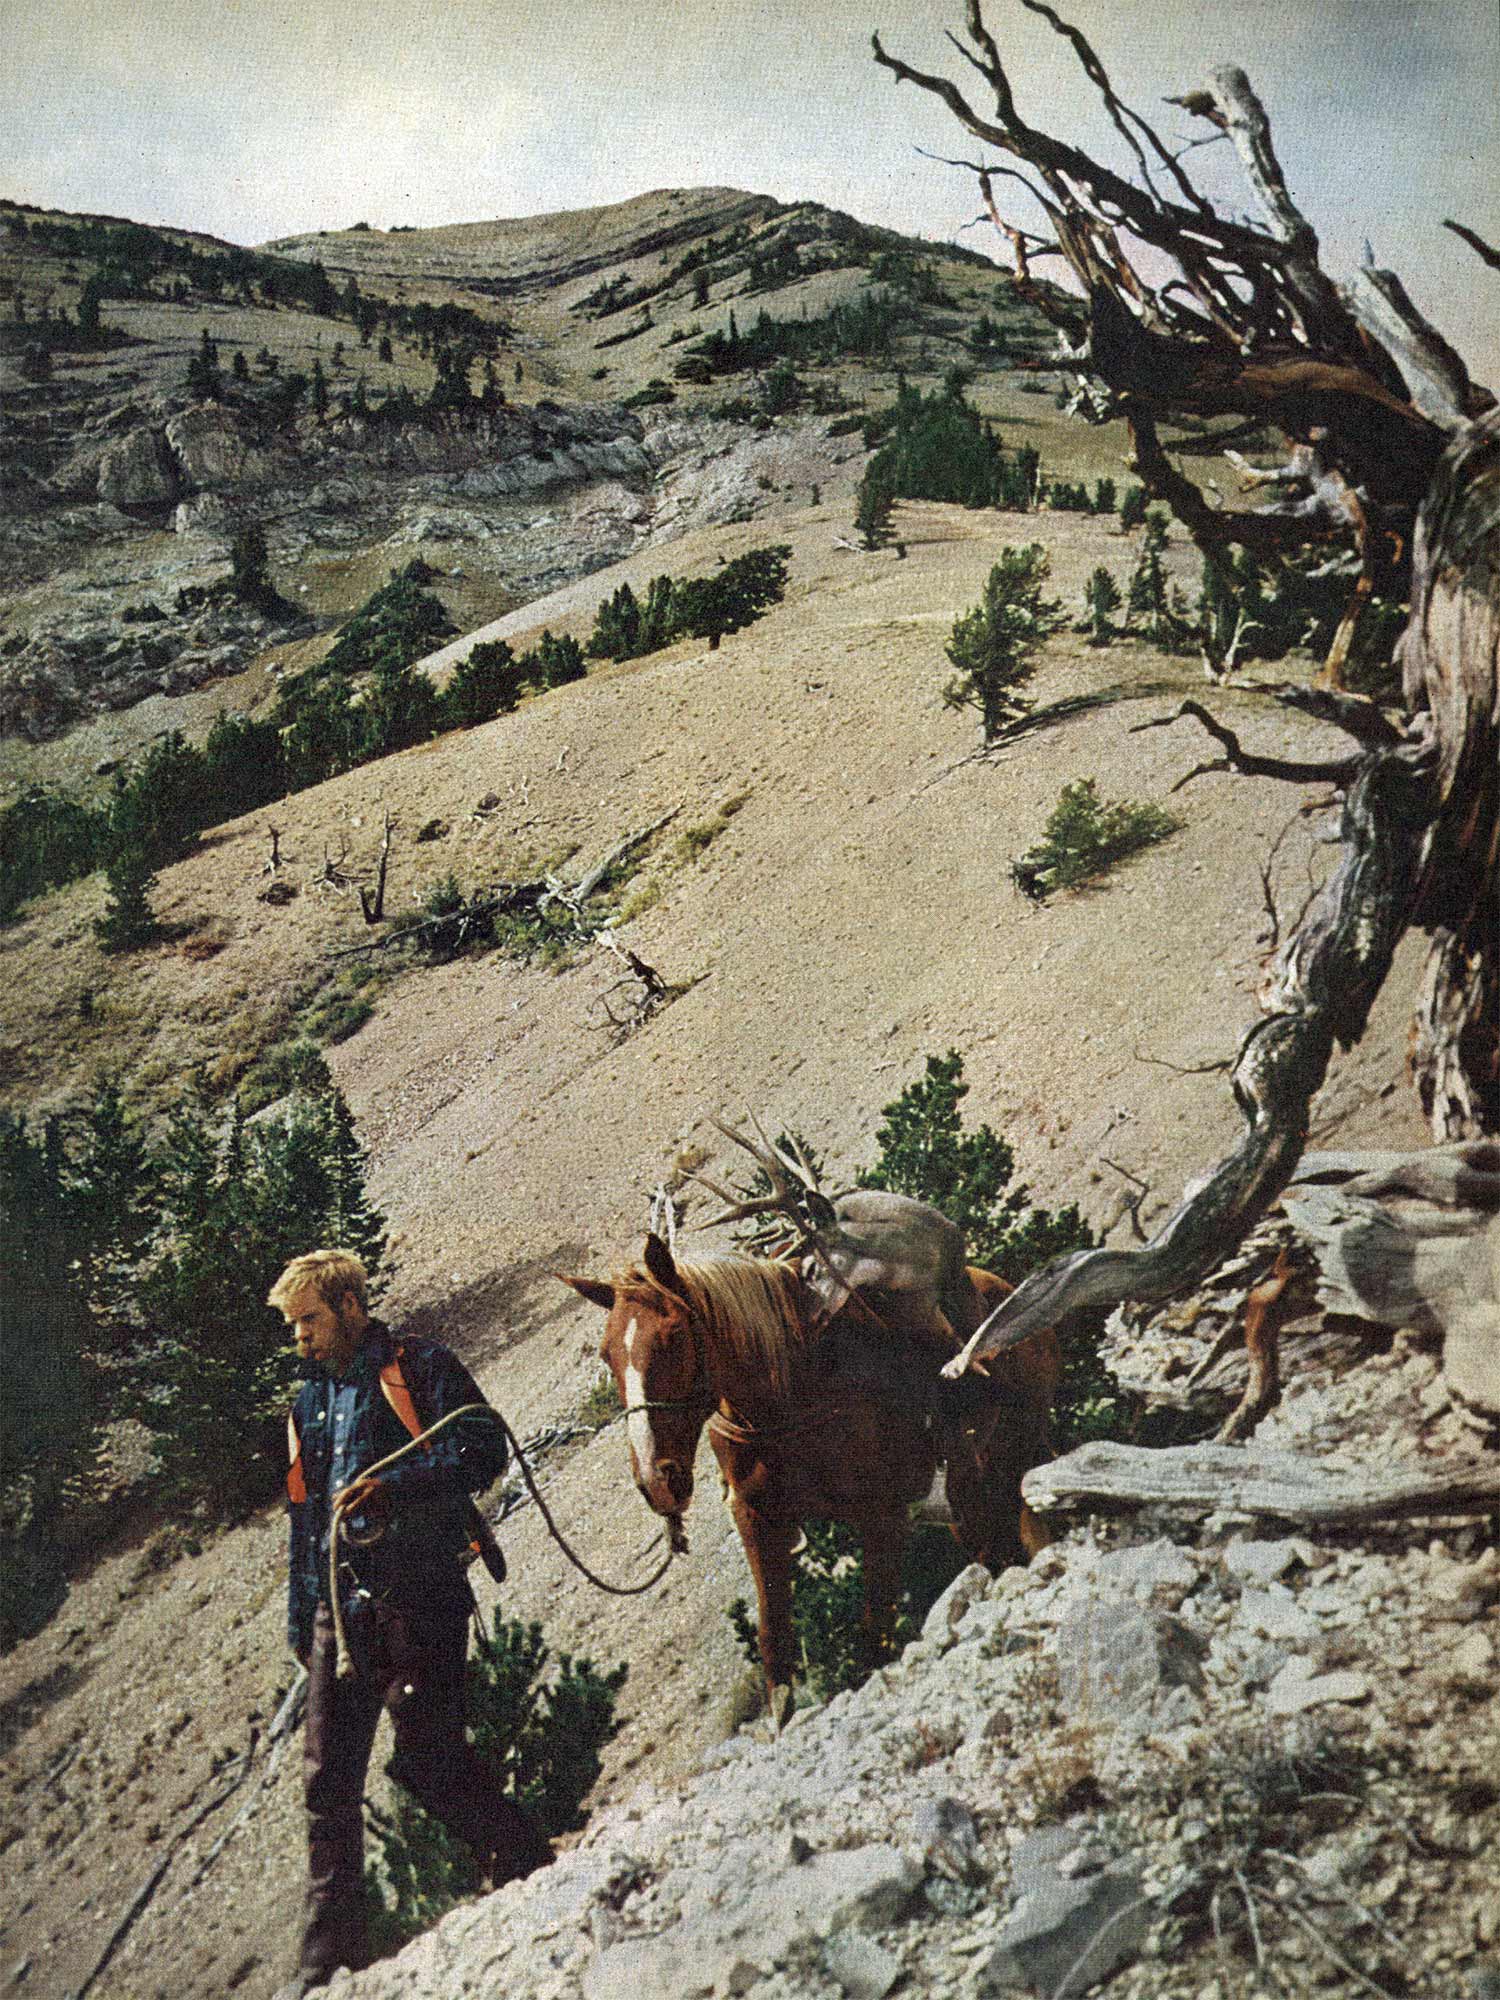 hunter leads horse down steep hill in high-elevation area with sparse elevation and a gnarled old tree in the foreground